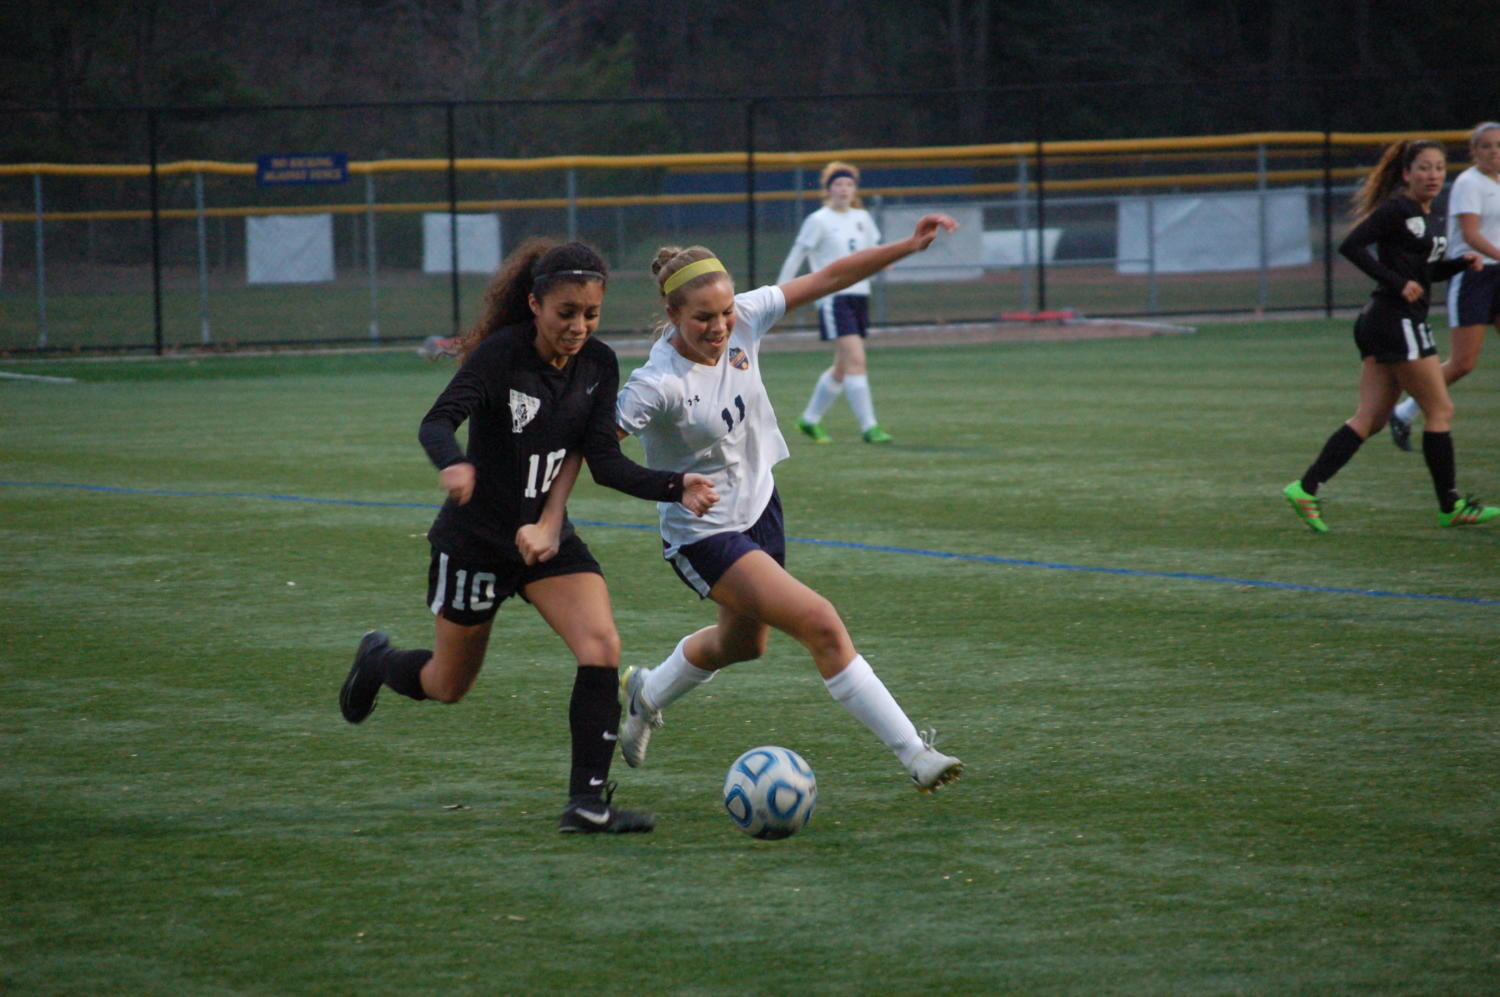 Sophomore Dahlia Jerovsek overpowers her opponent while chasing after the ball